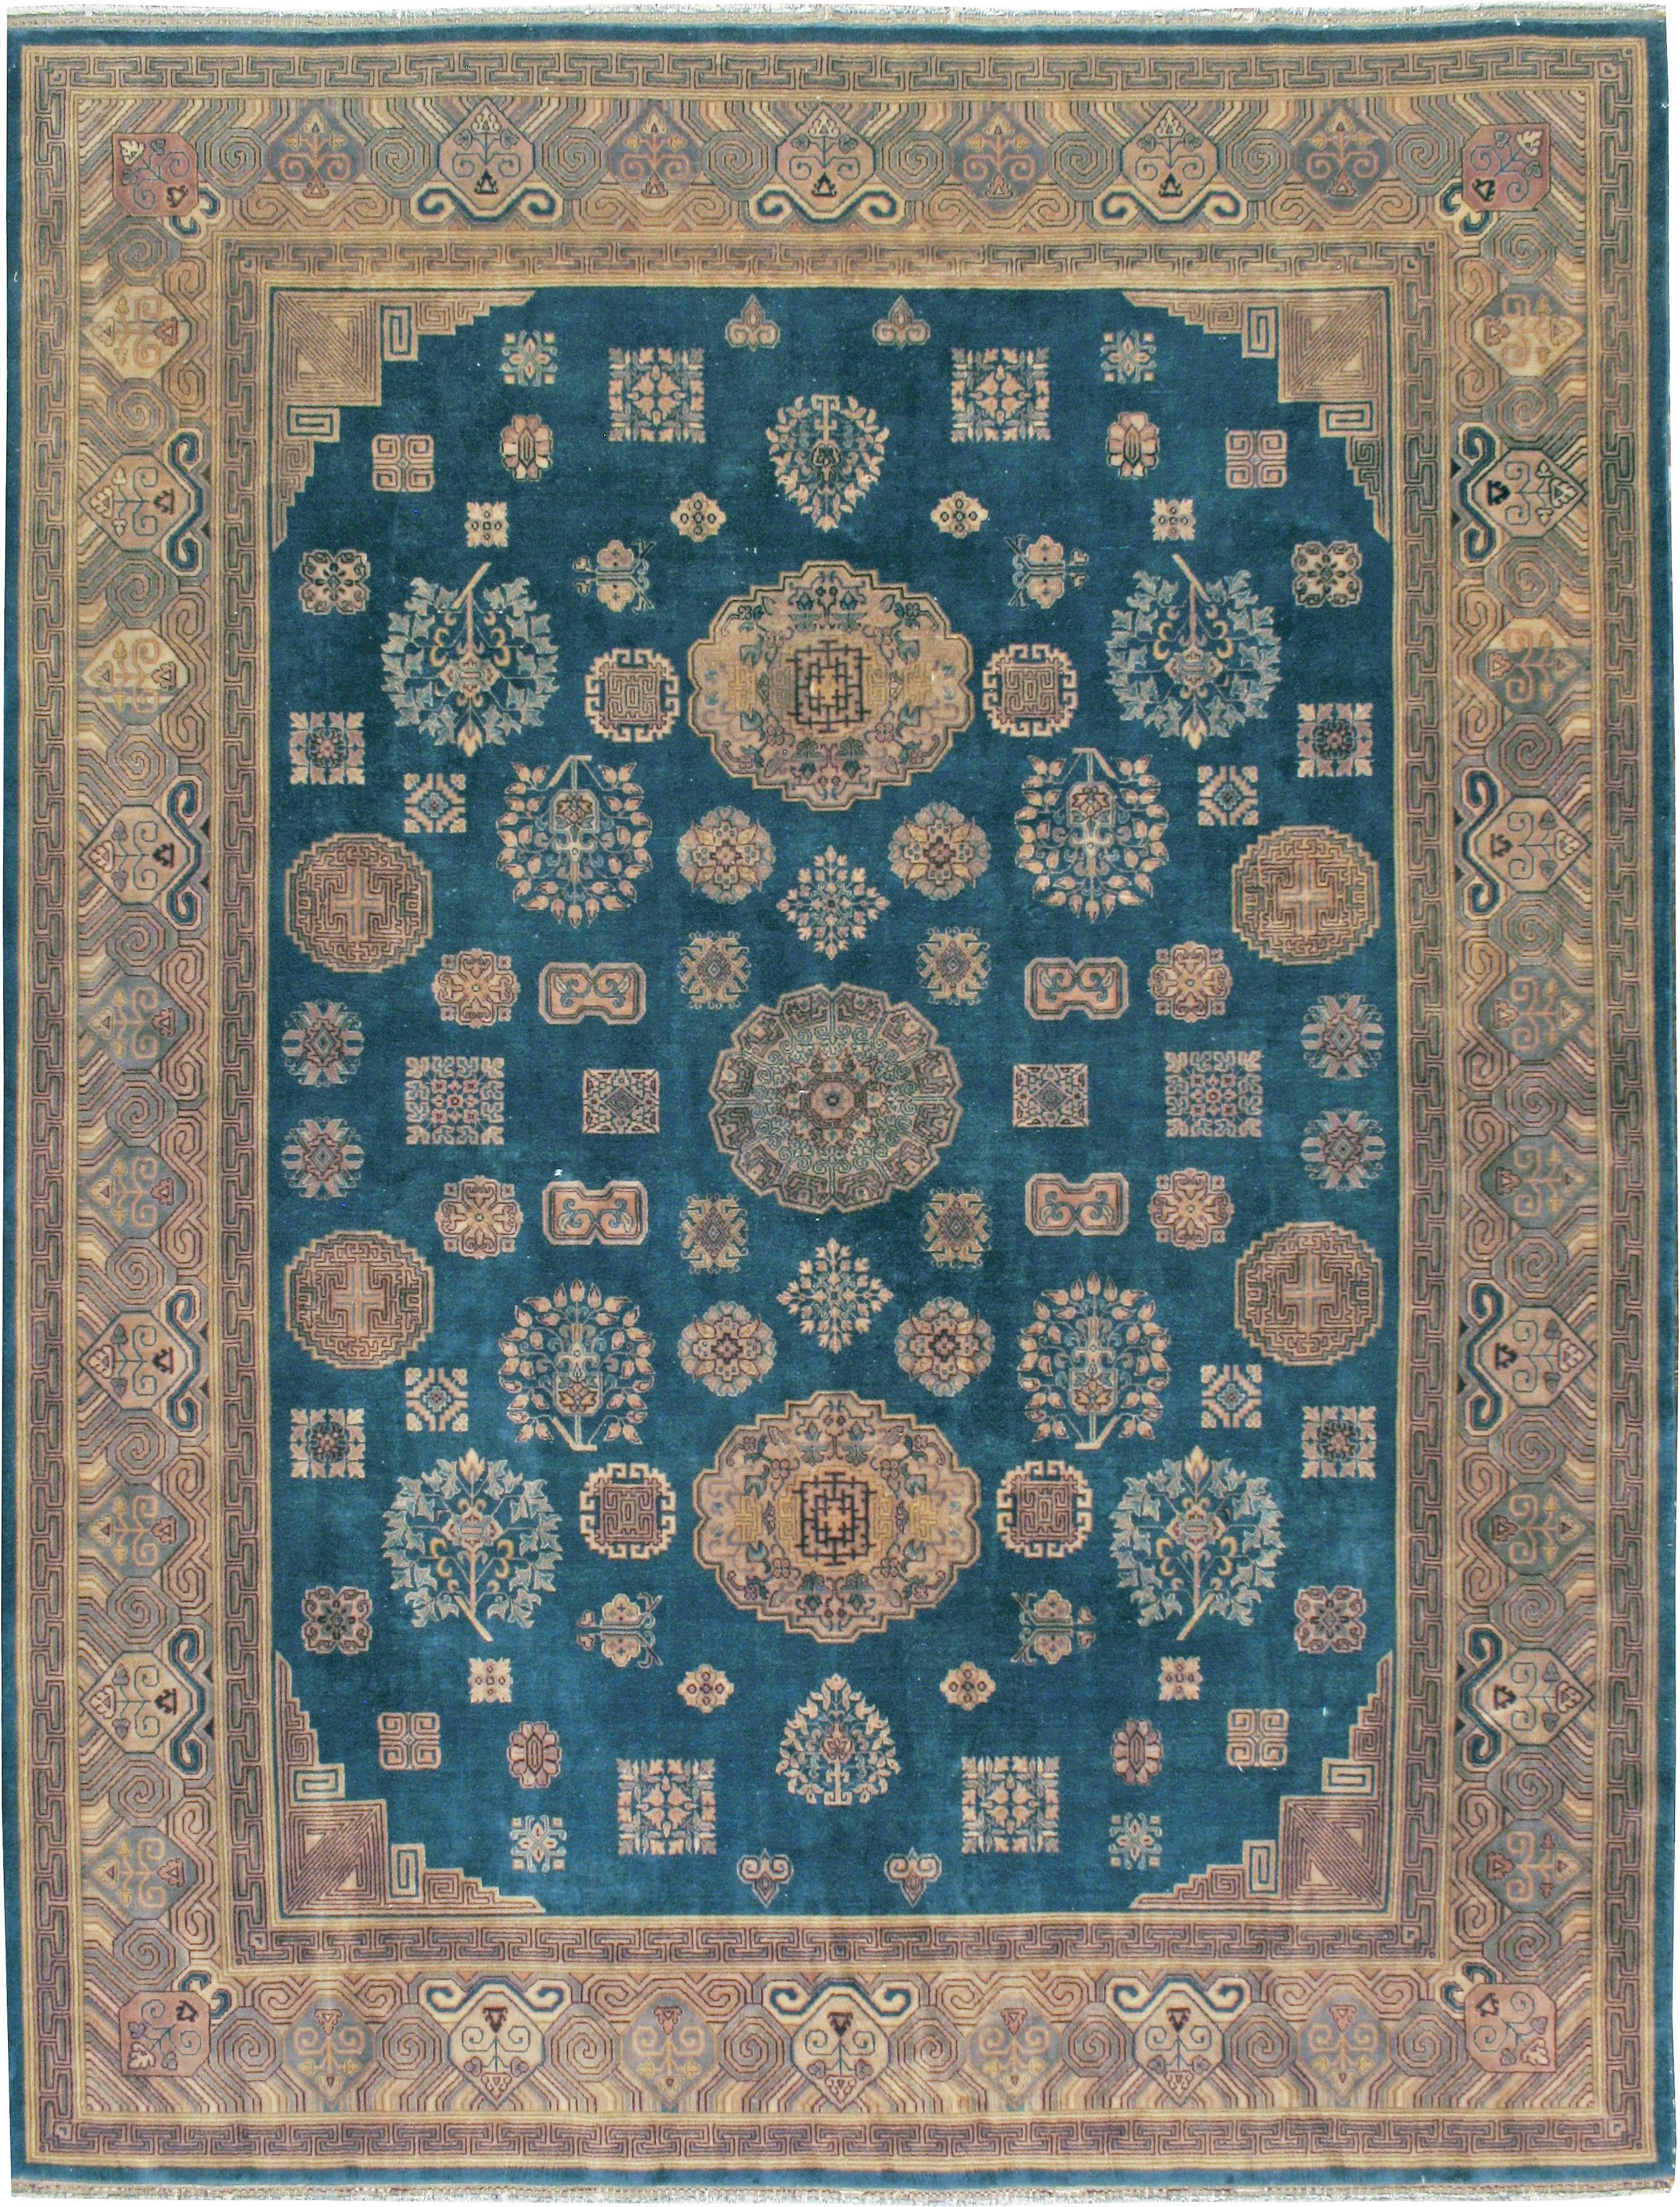 A vintage Chinese carpet with a Khotan design from the second quarter of the 20th century.

Measures: 9' 0